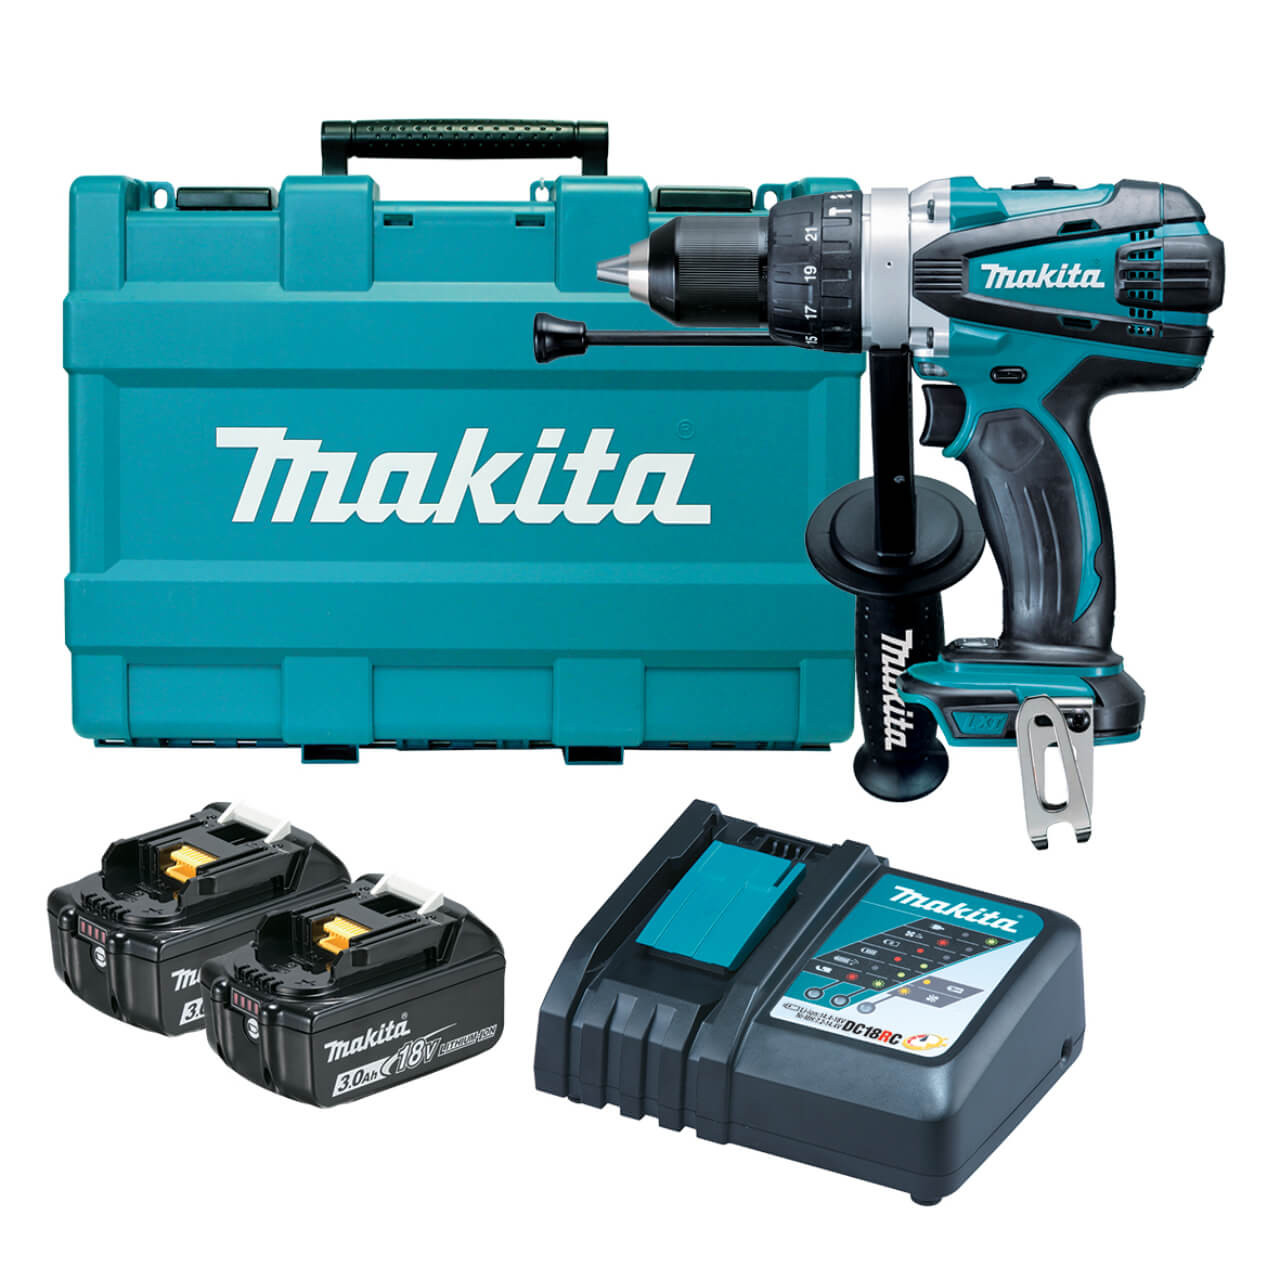 Makita 18V Heavy Duty Hammer Driver Drill Kit - Includes 2 x 3.0Ah Batteries. Rapid Charger & Carry Case